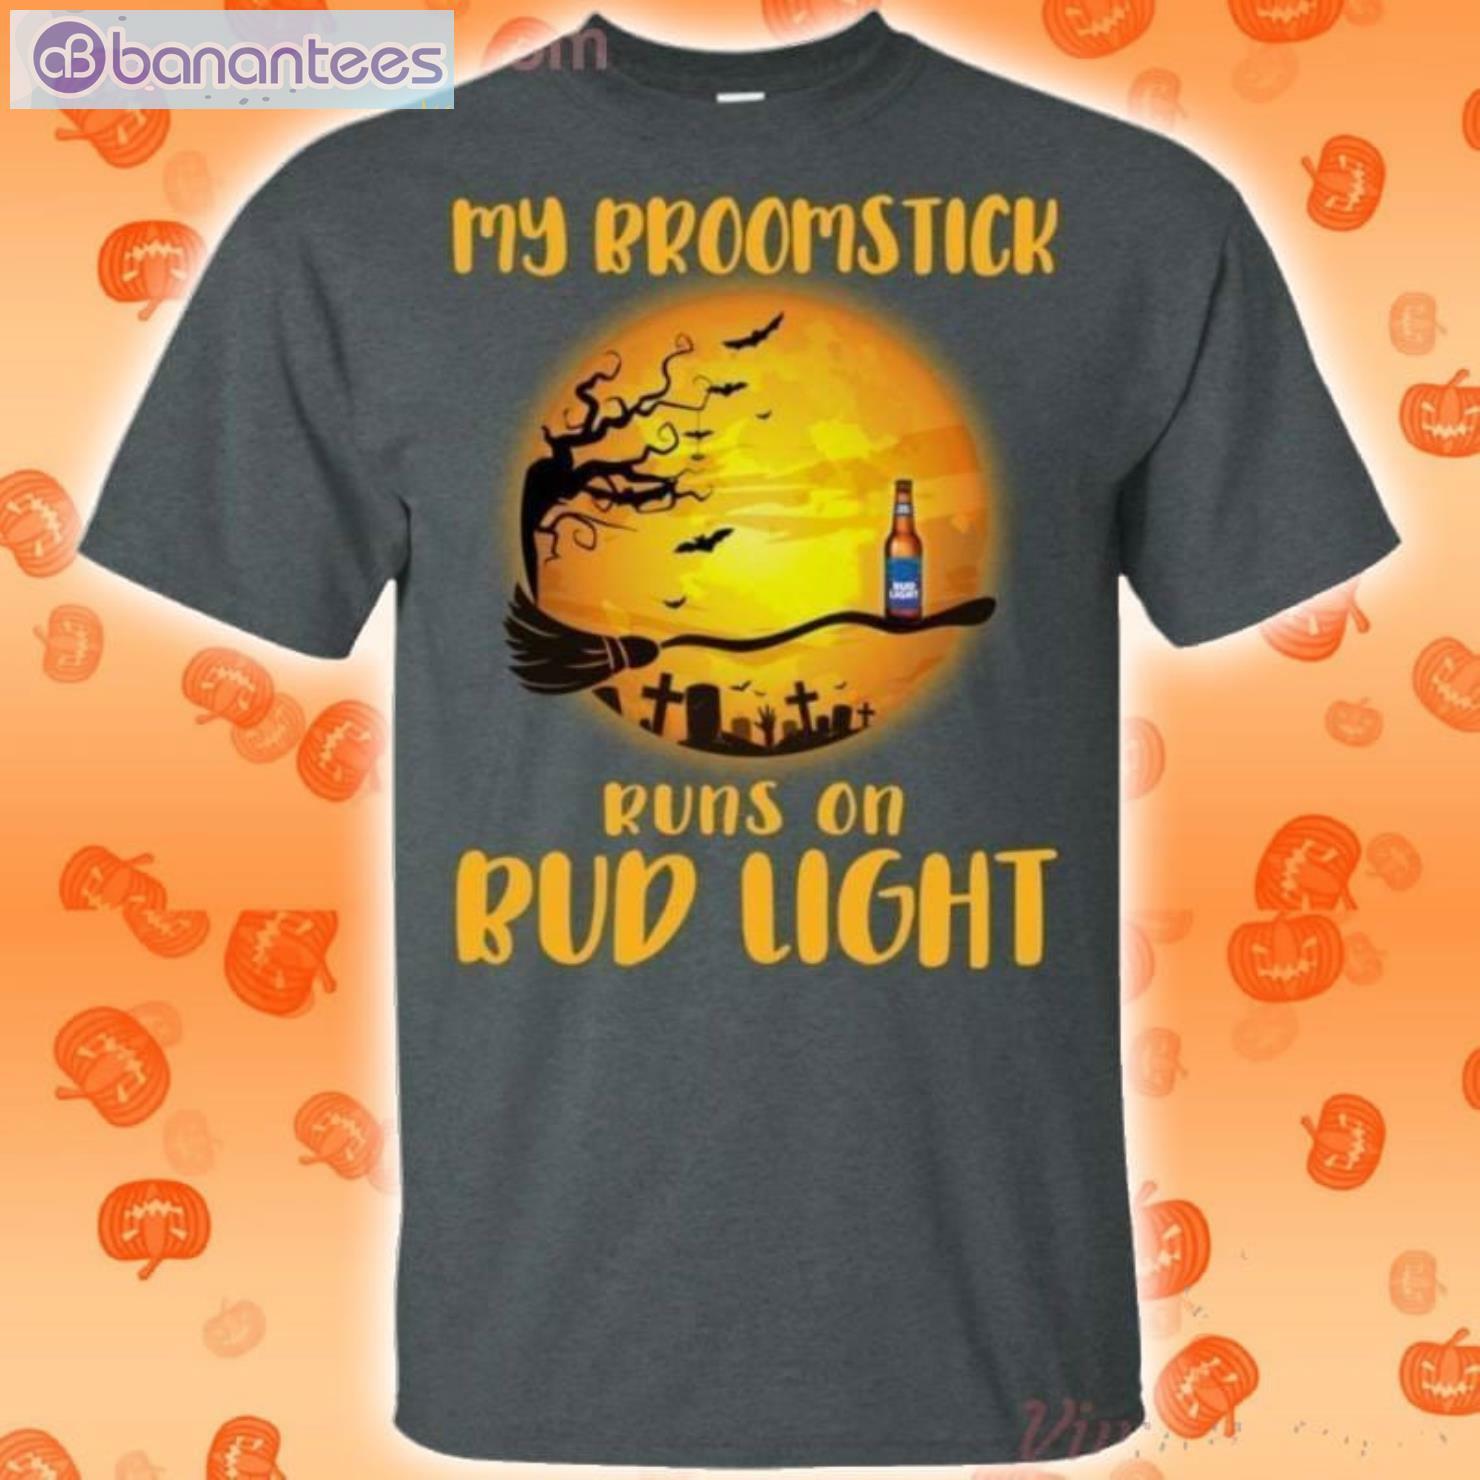 My Broomstick Runs On Bud Light Funny Beer Halloween T-Shirt Product Photo 2 Product photo 2